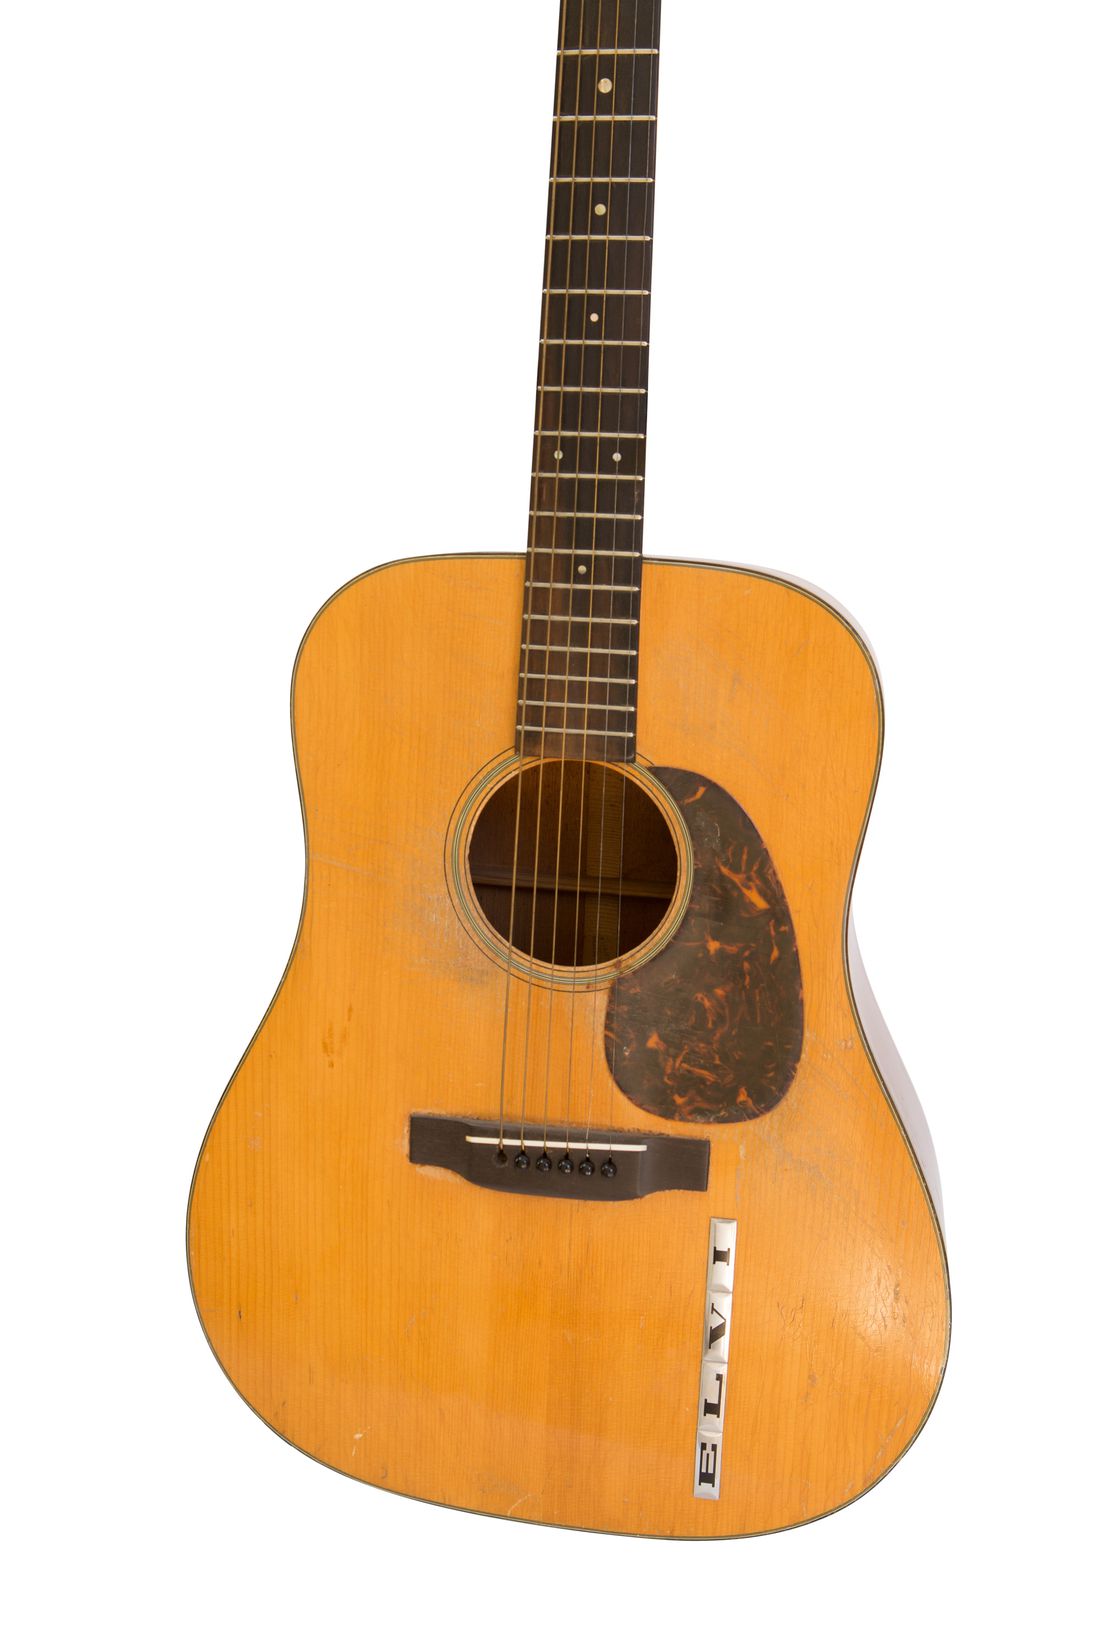 Elvis Presley used this acoustic guitar as his main guitar for rhythm playing during his Sun Studios sessions.